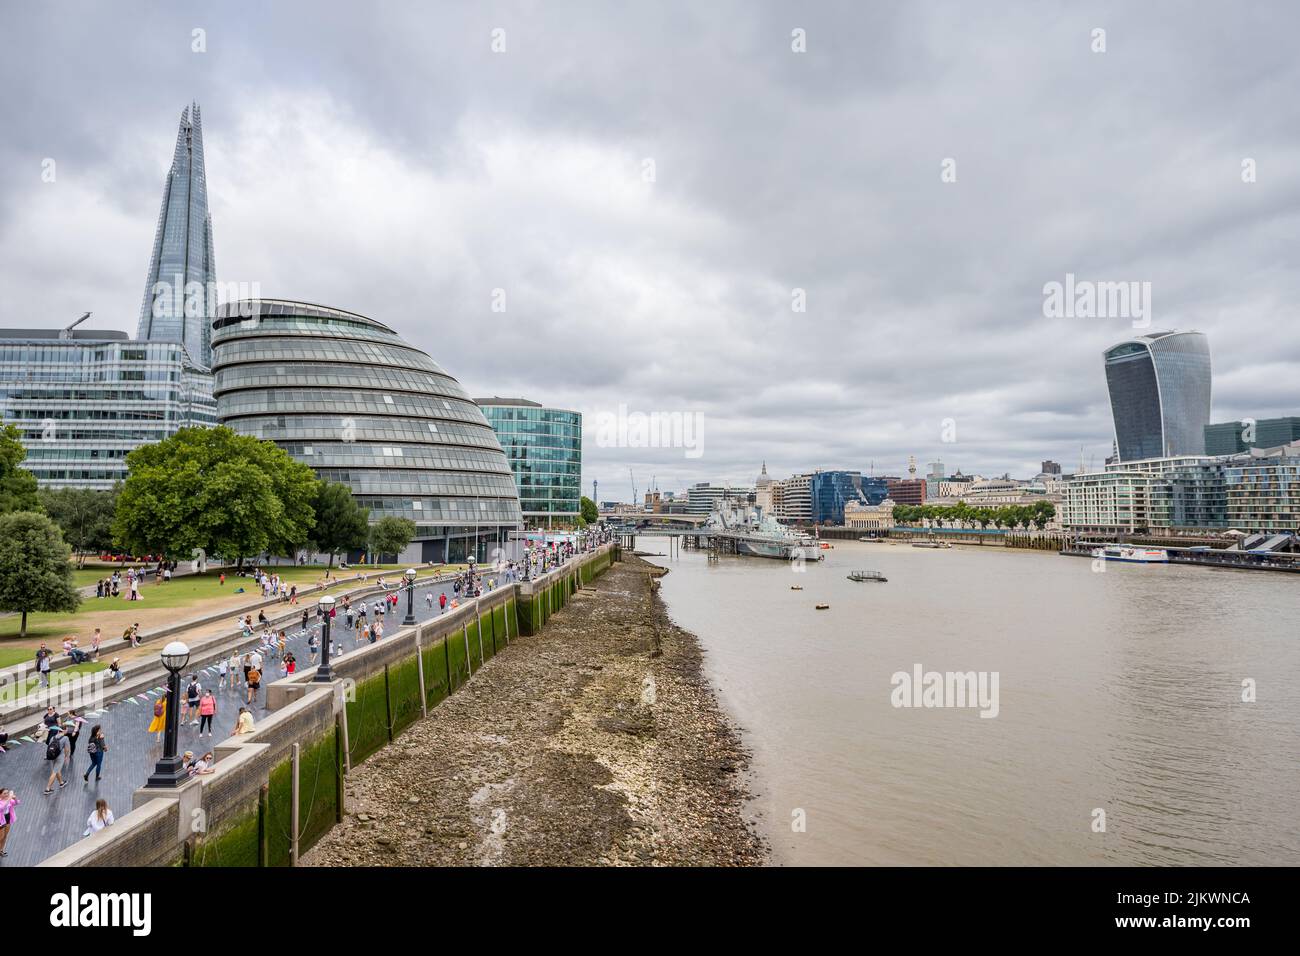 The Pool of London are of the River Thames in London surrounded by iconic landmarks in August 2022 including The Shard, The Scoop, HMS Belfast and the Stock Photo